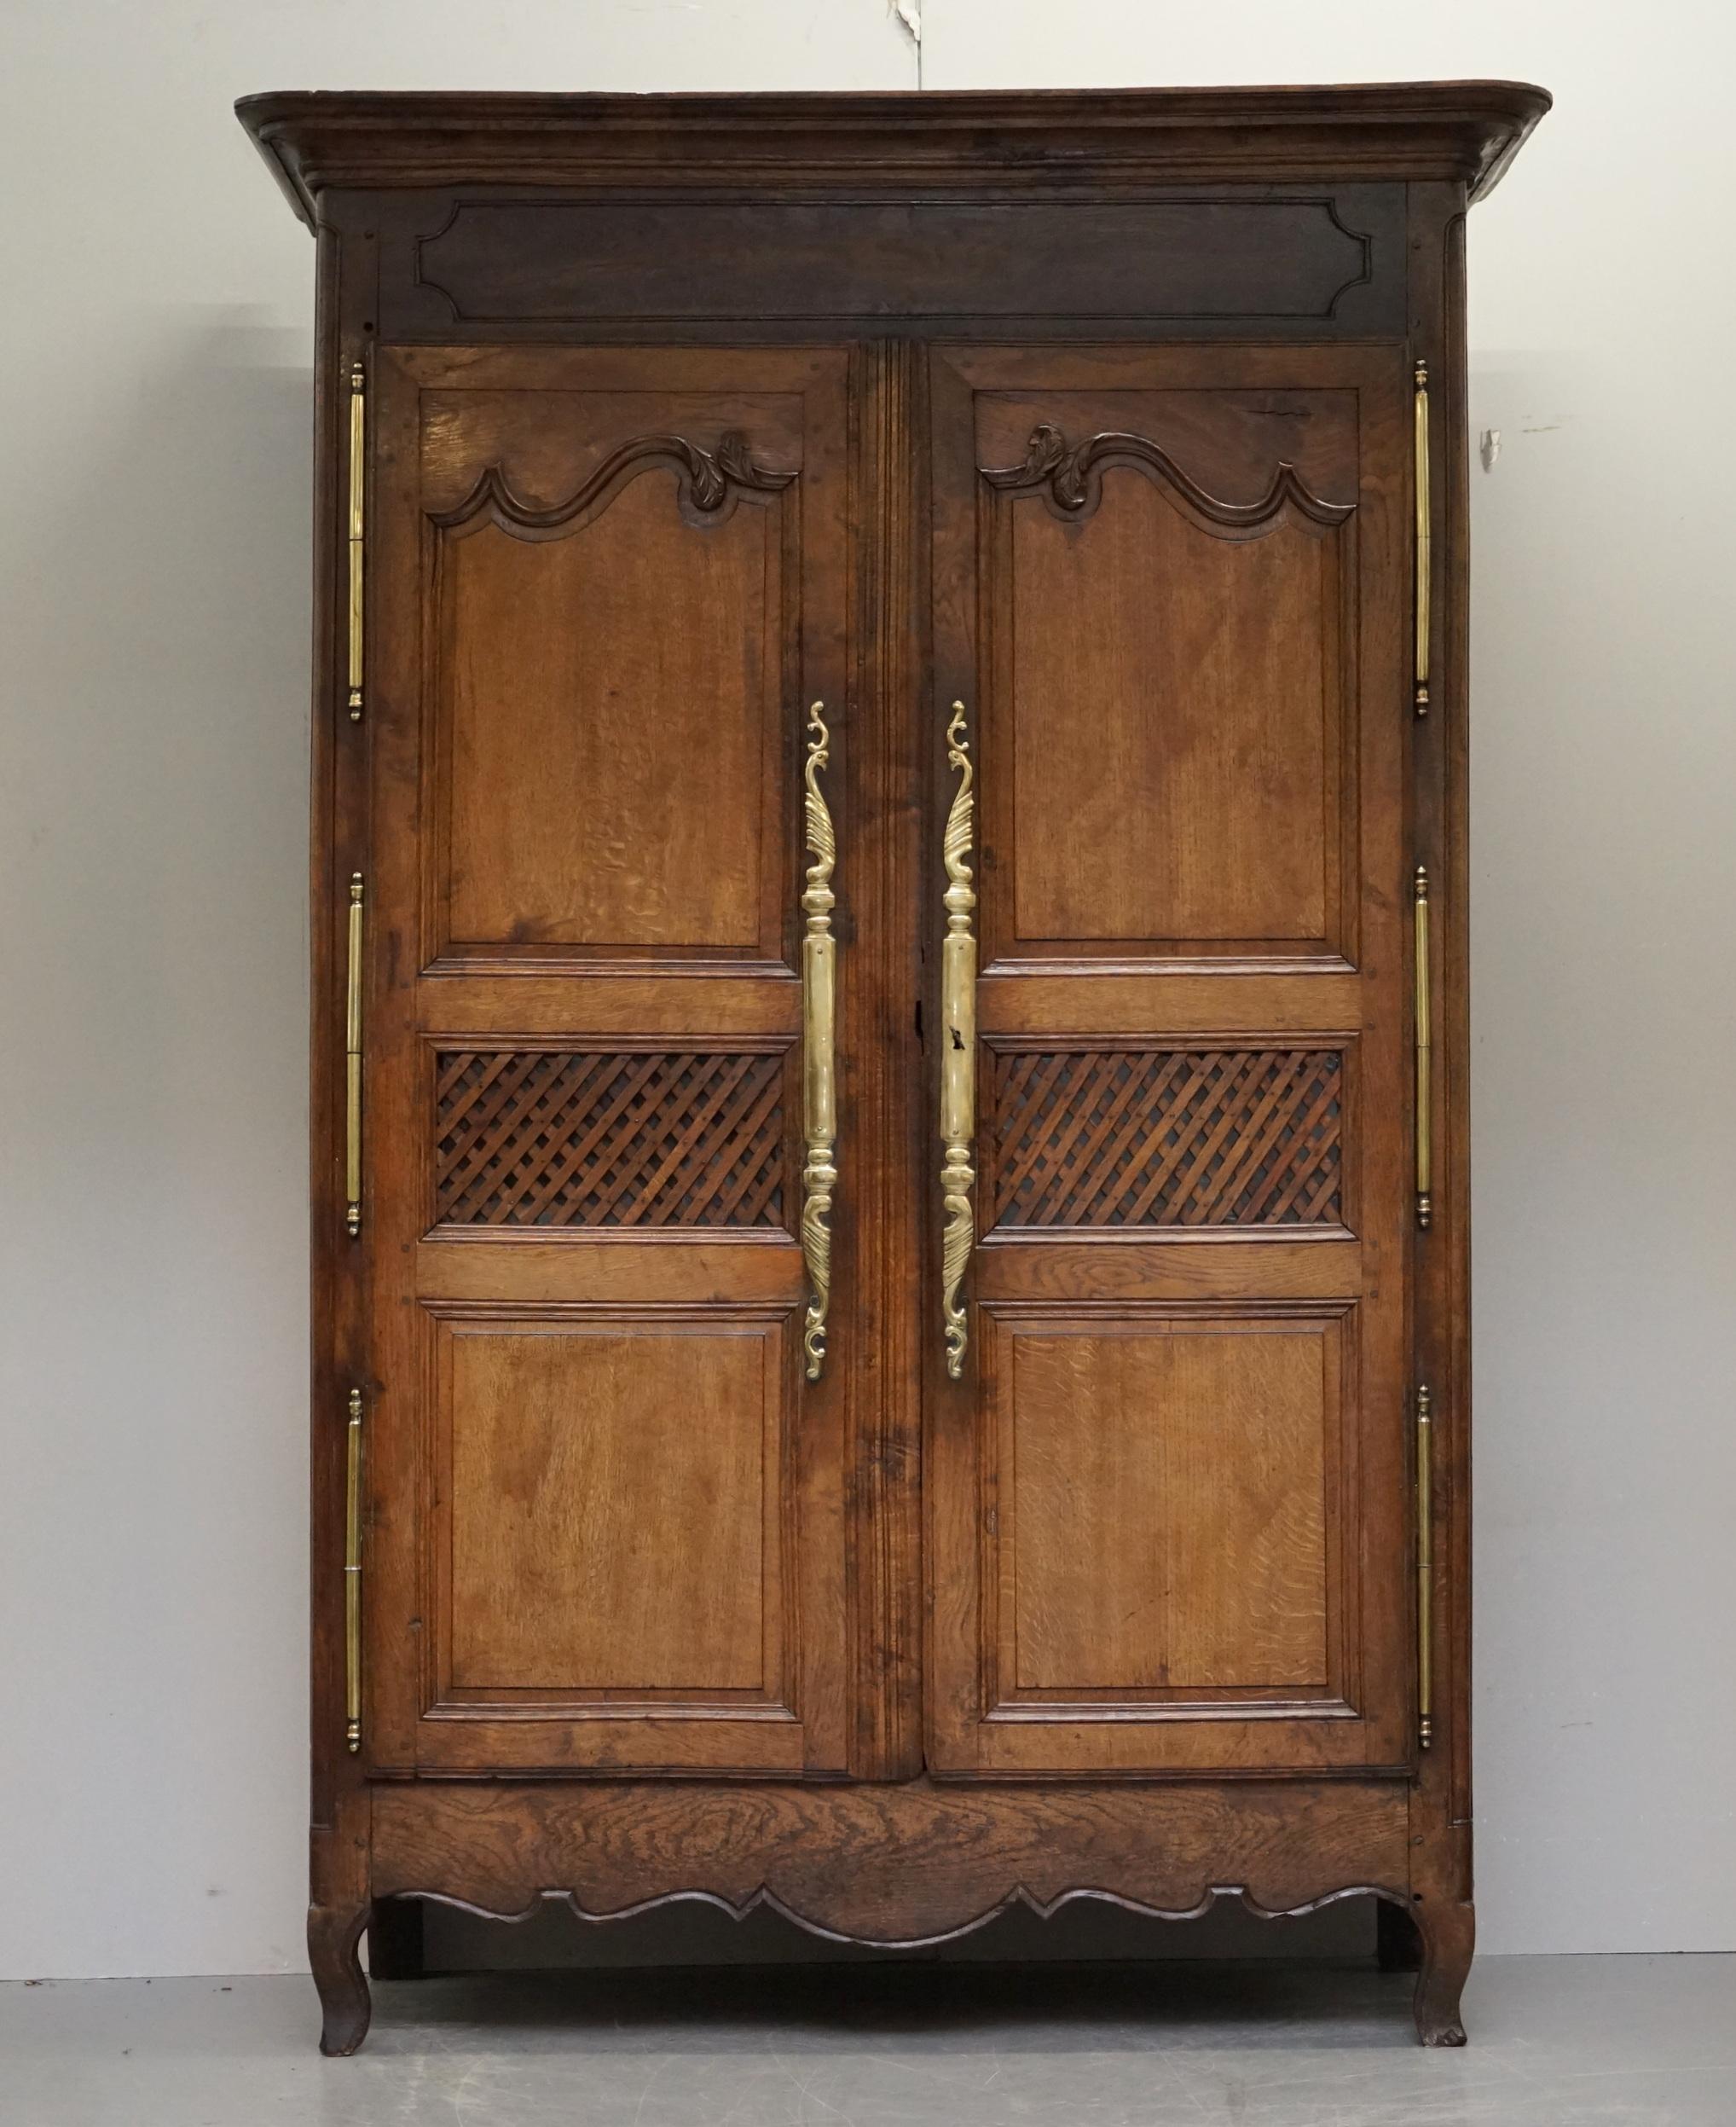 We are delighted to offer for sale this sublime circa 1780 late 18th century French oak with oversized brass fittings armoire or pot cupboard 

A very good looking and well made piece. Designed as an armoire for folded linens, used largely these